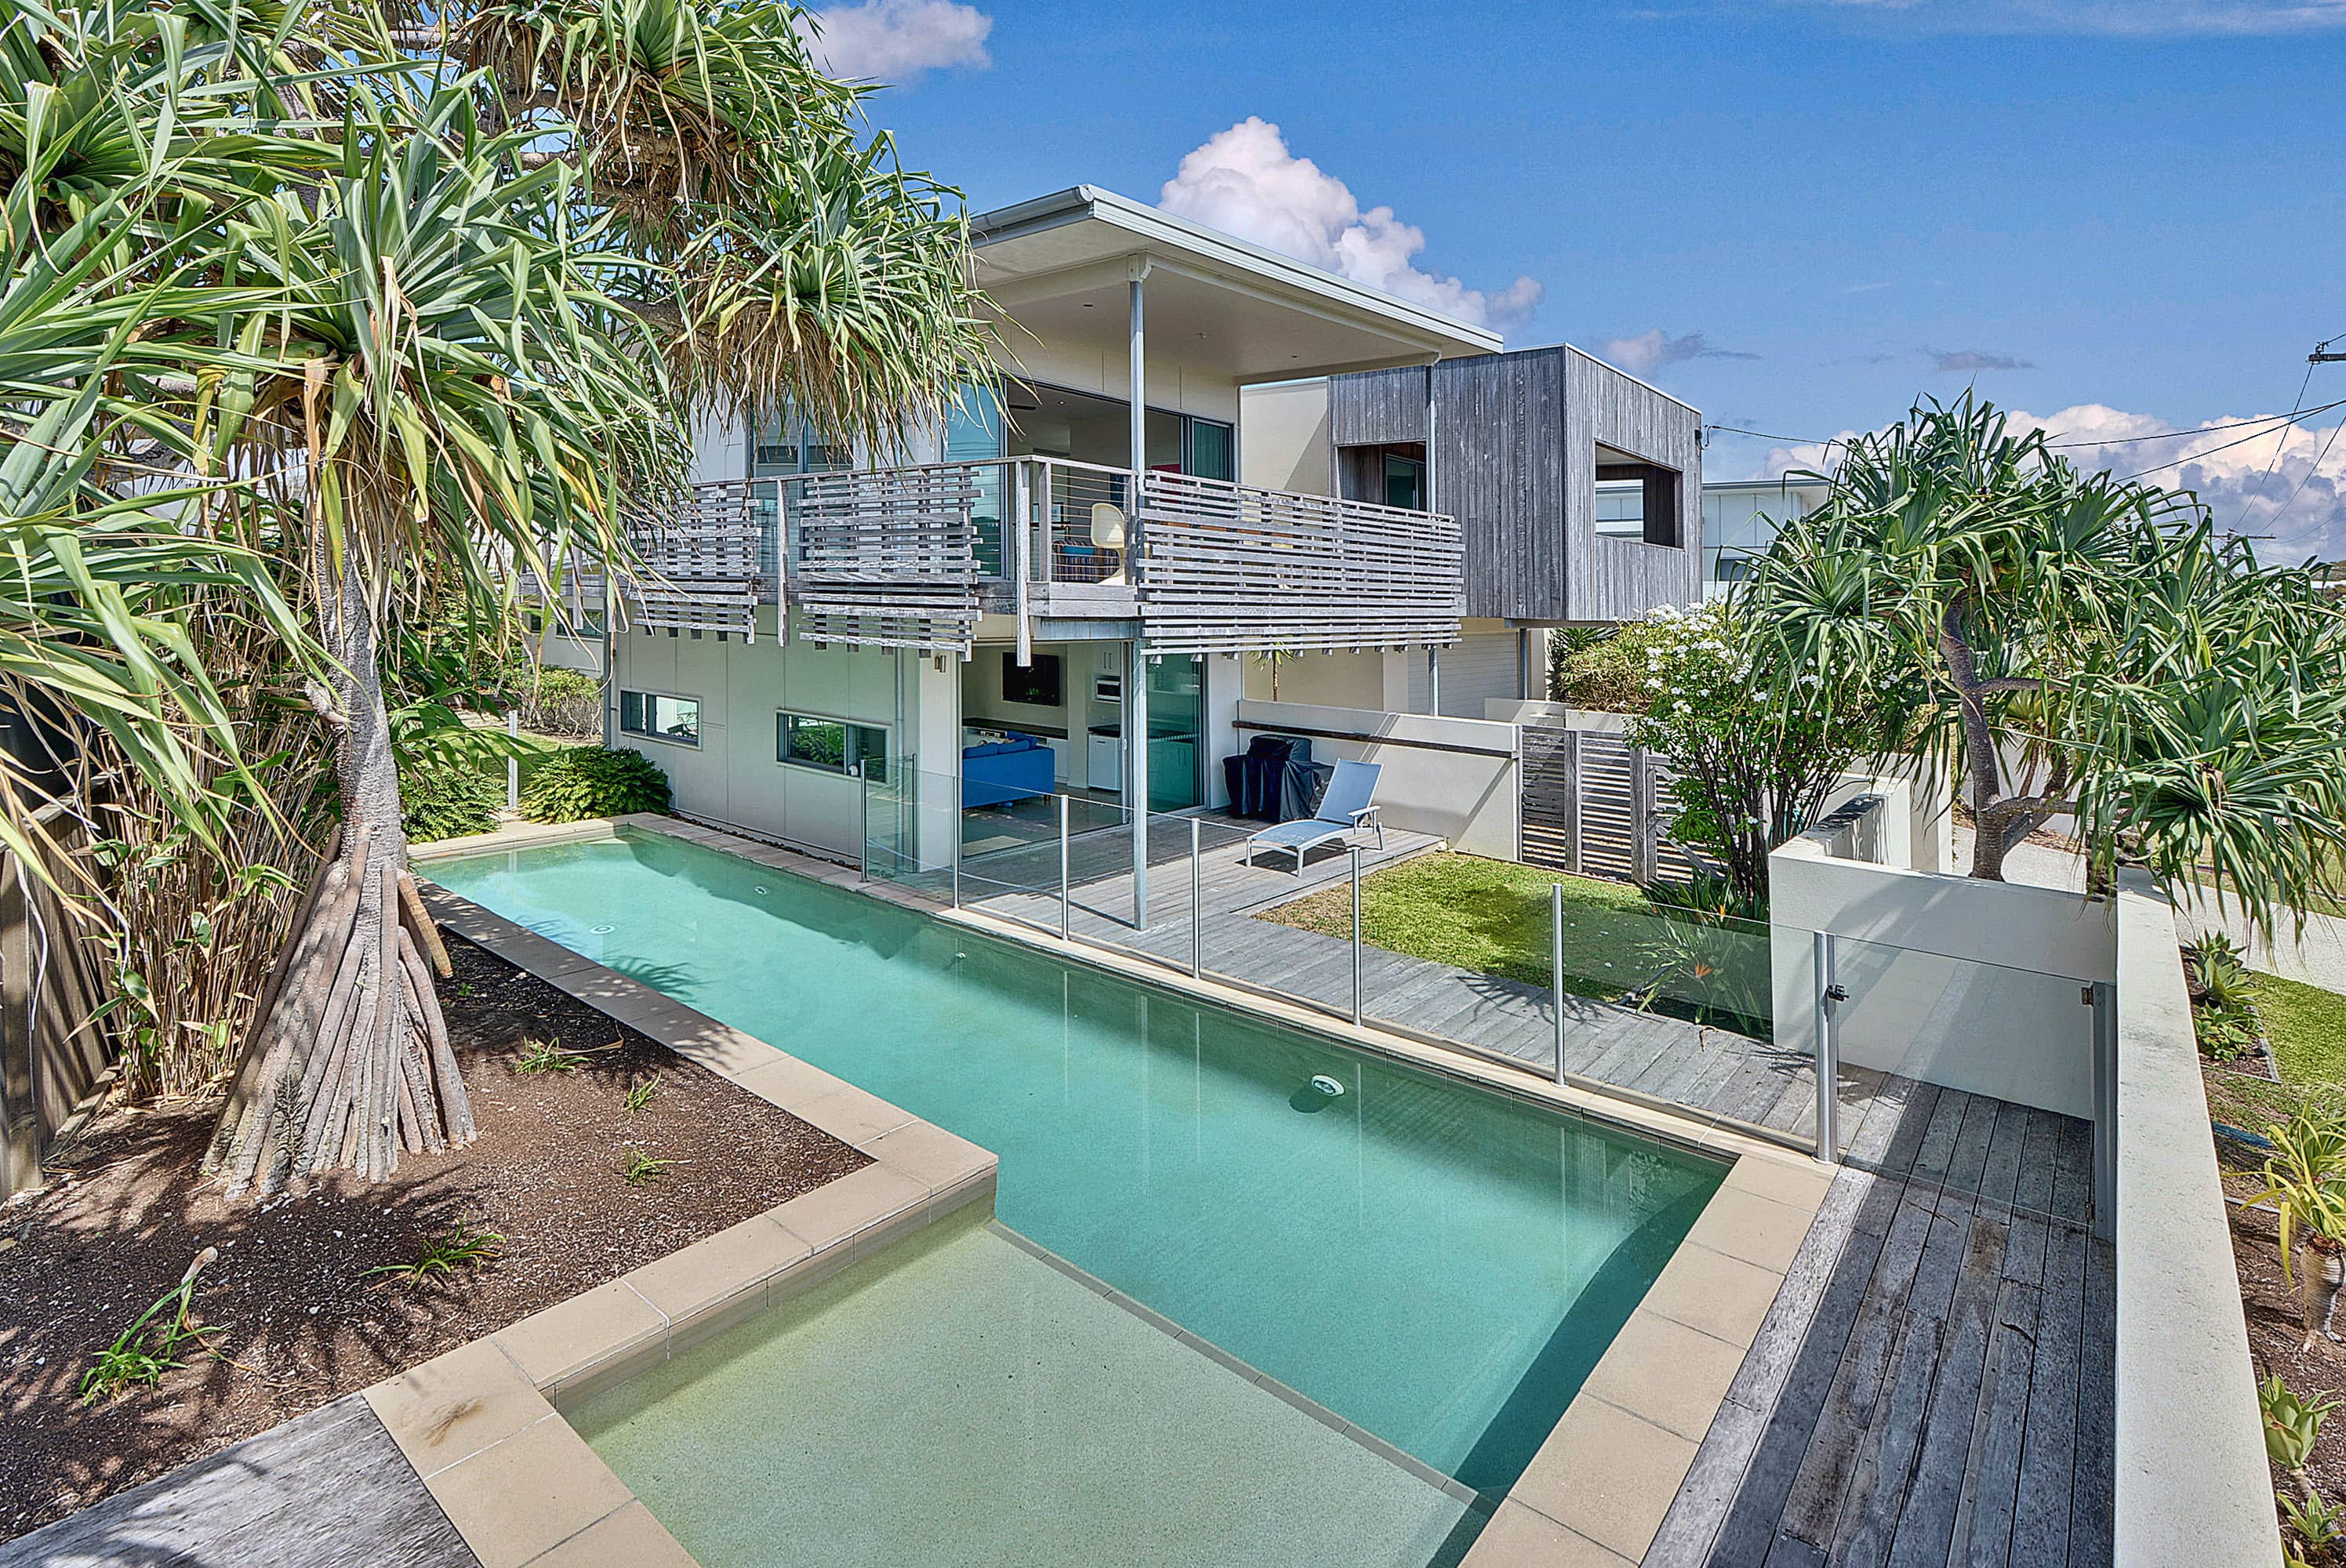 Mackay Street project by mdesign, a building design practice that operates on the Sunshine Coast.